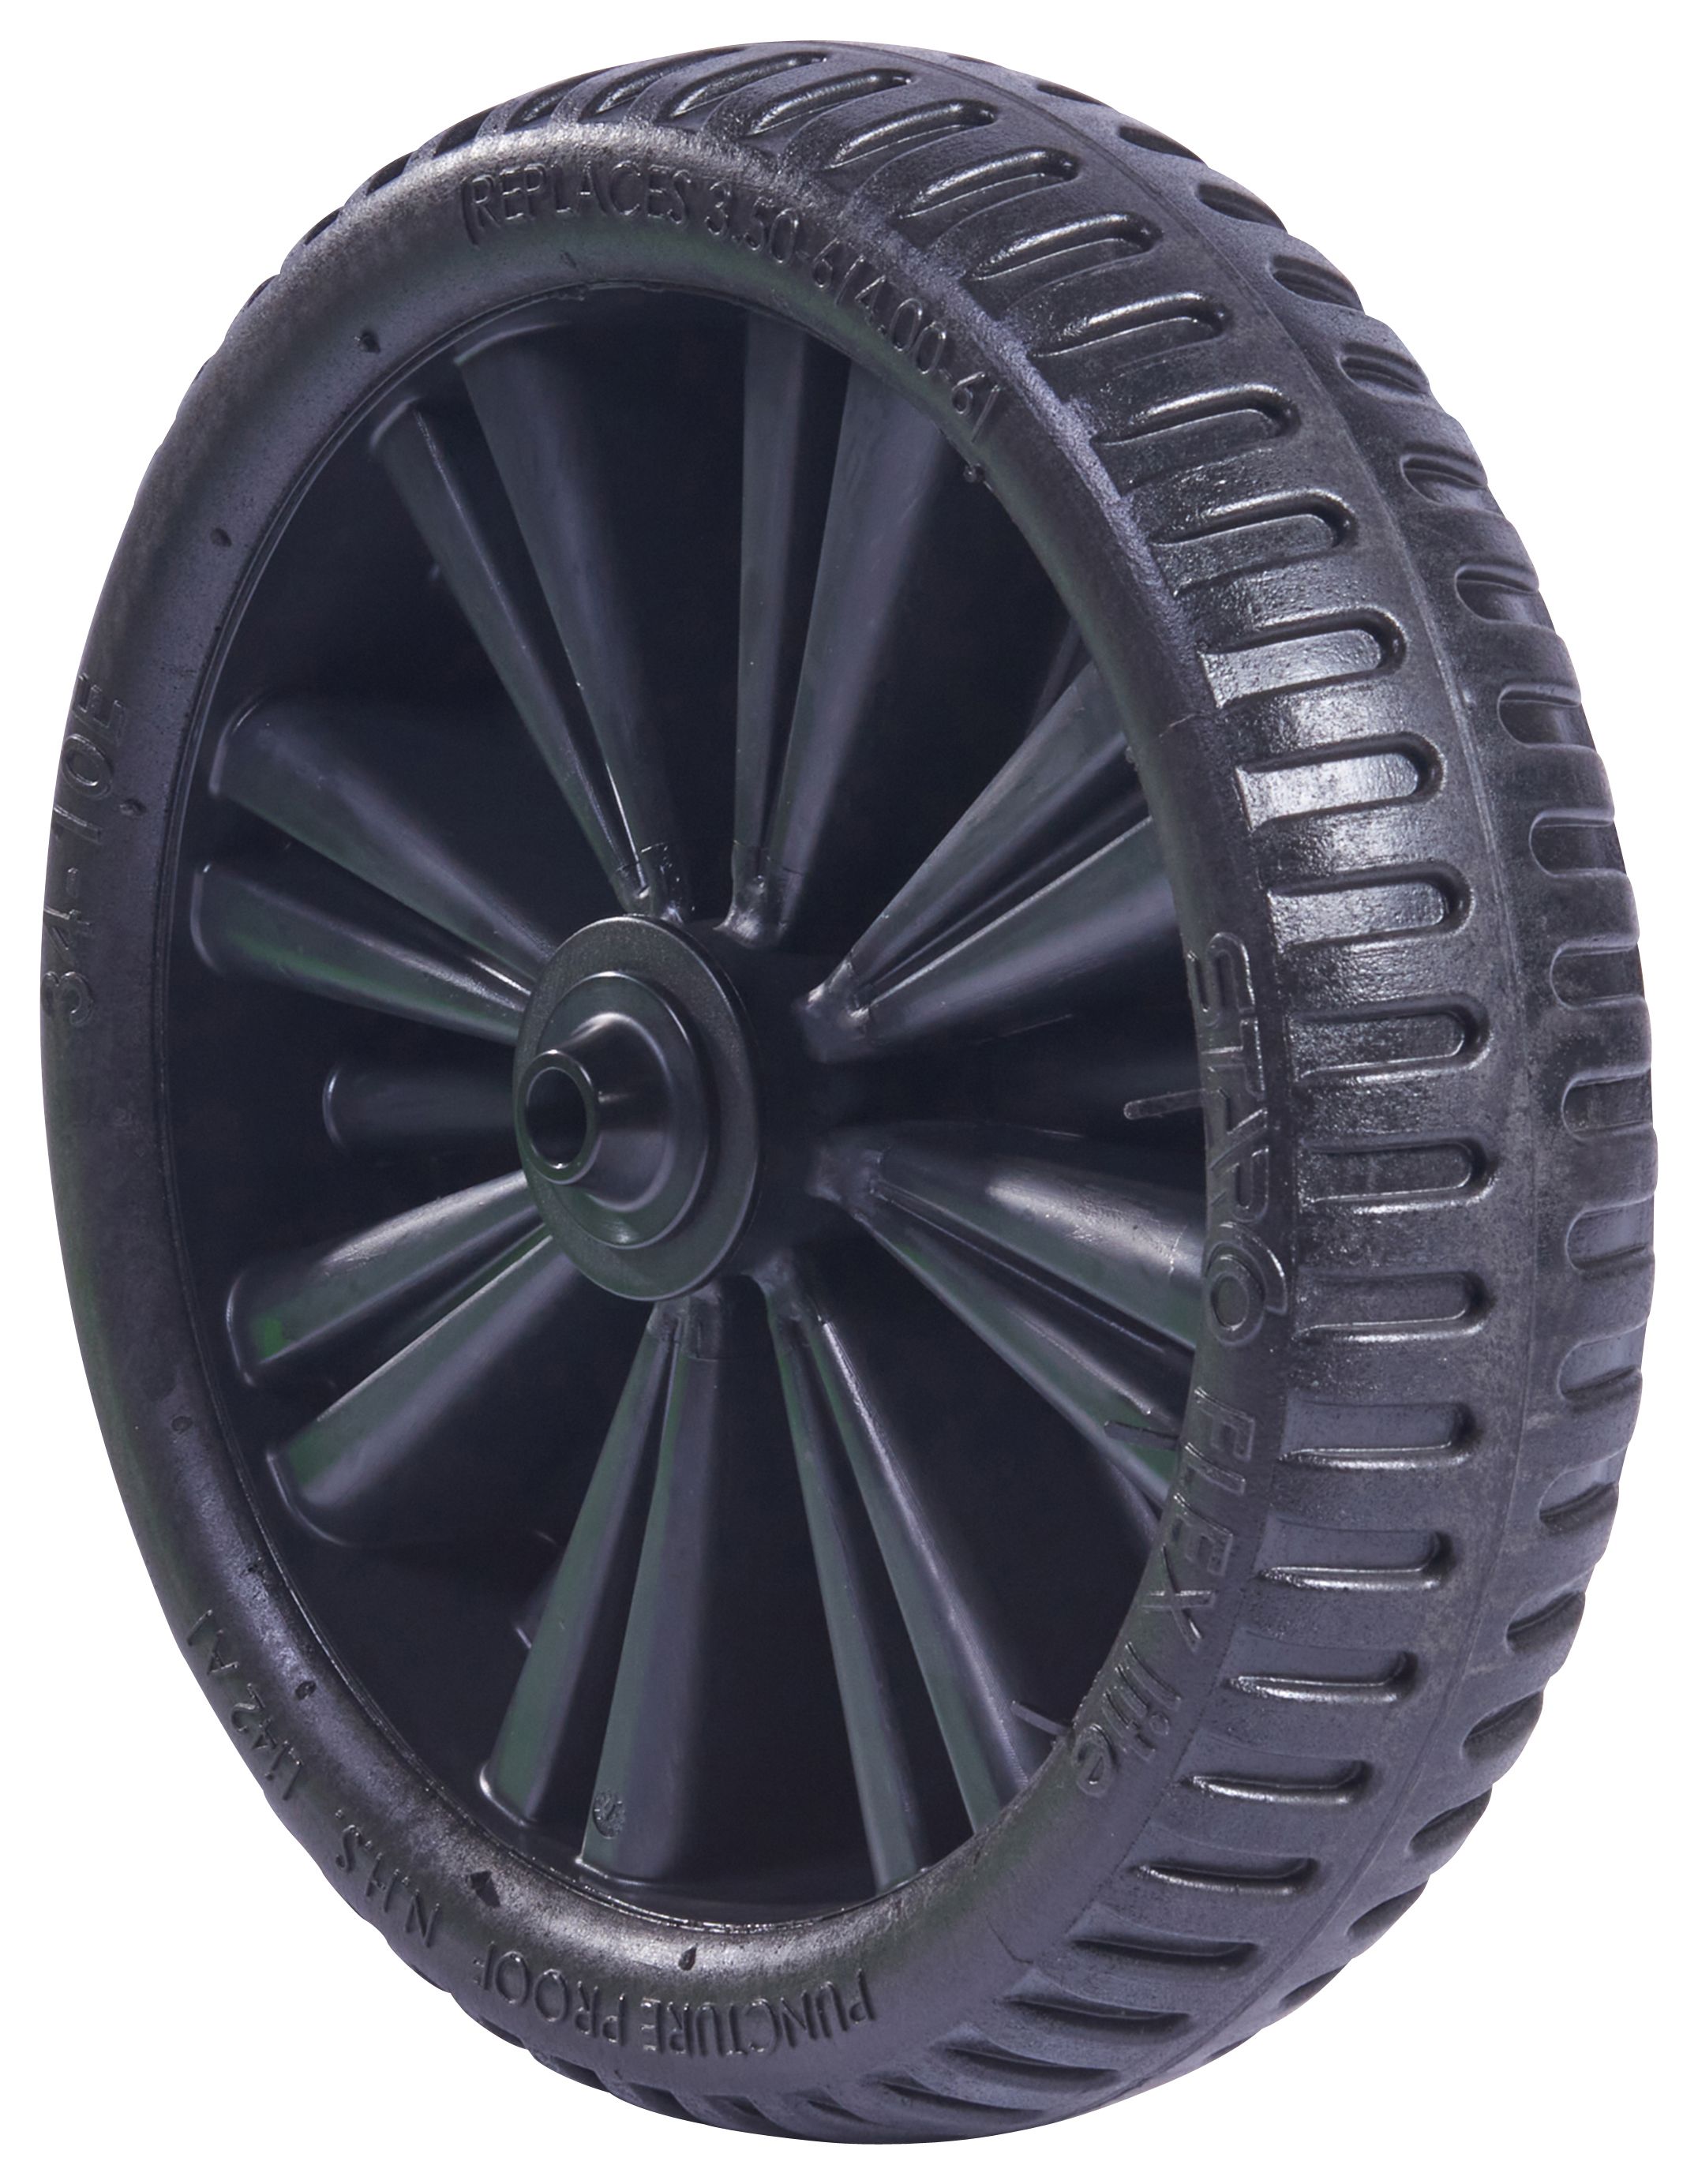 Image of Haemmerlin Black Puncture Free Spare Wheel 1487 (New Model)